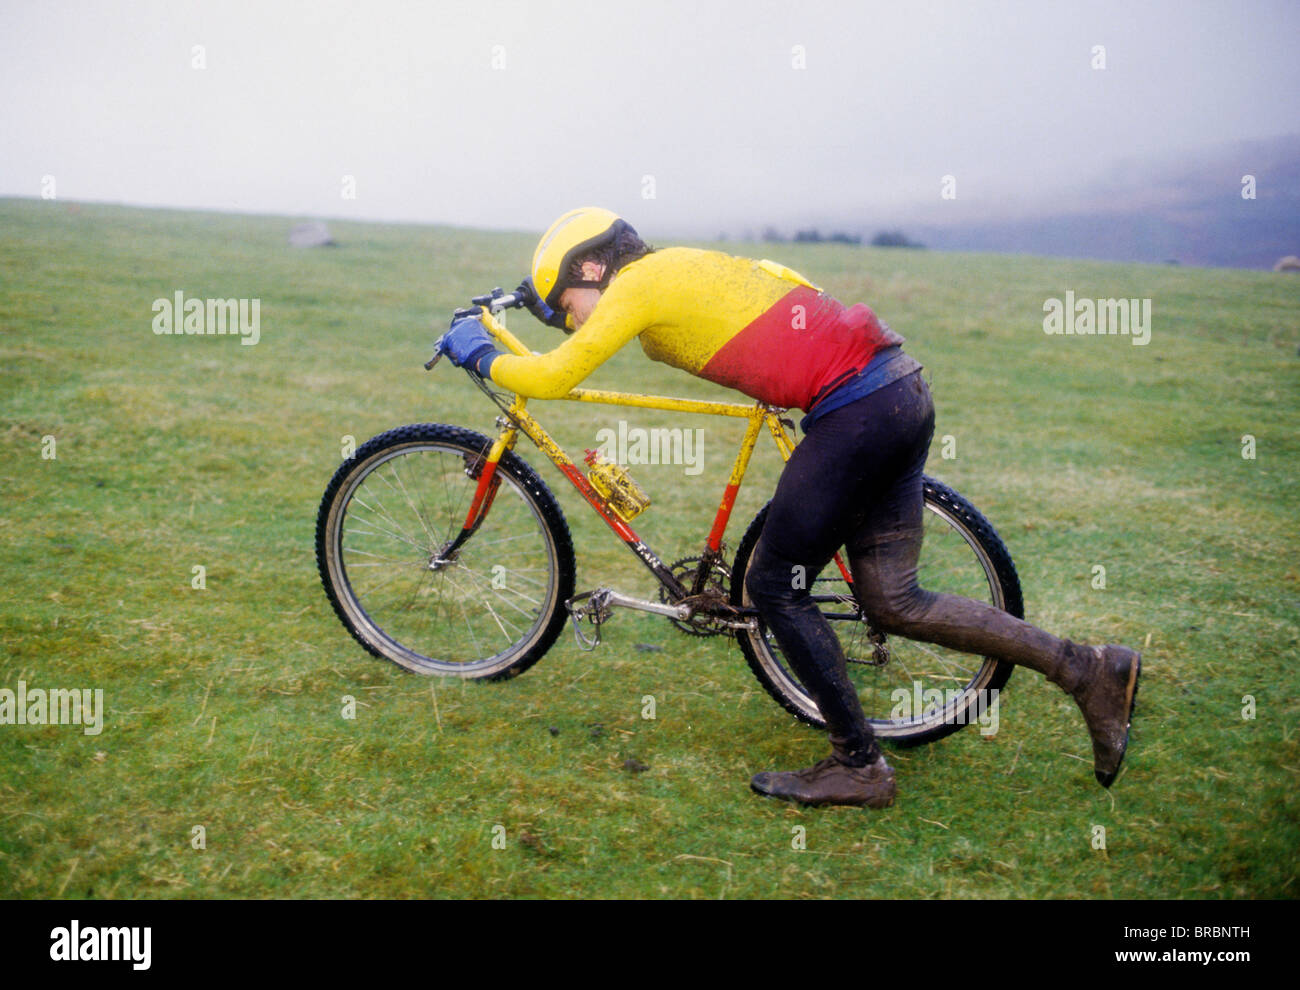 Mountain bike racer pushes his bike up hill course Stock Photo